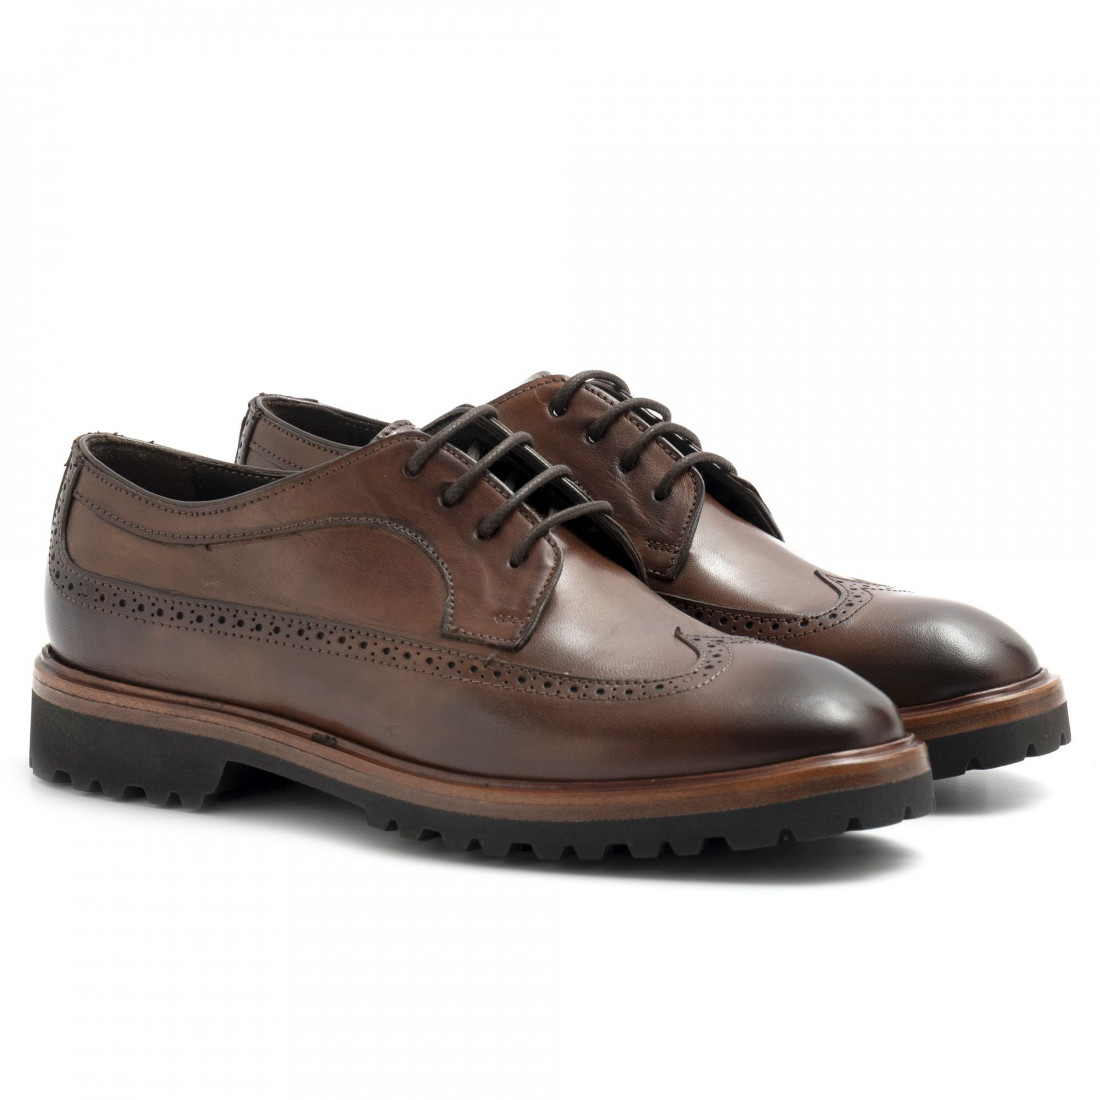 Women's Brecos derby brogue shoes in brown leather